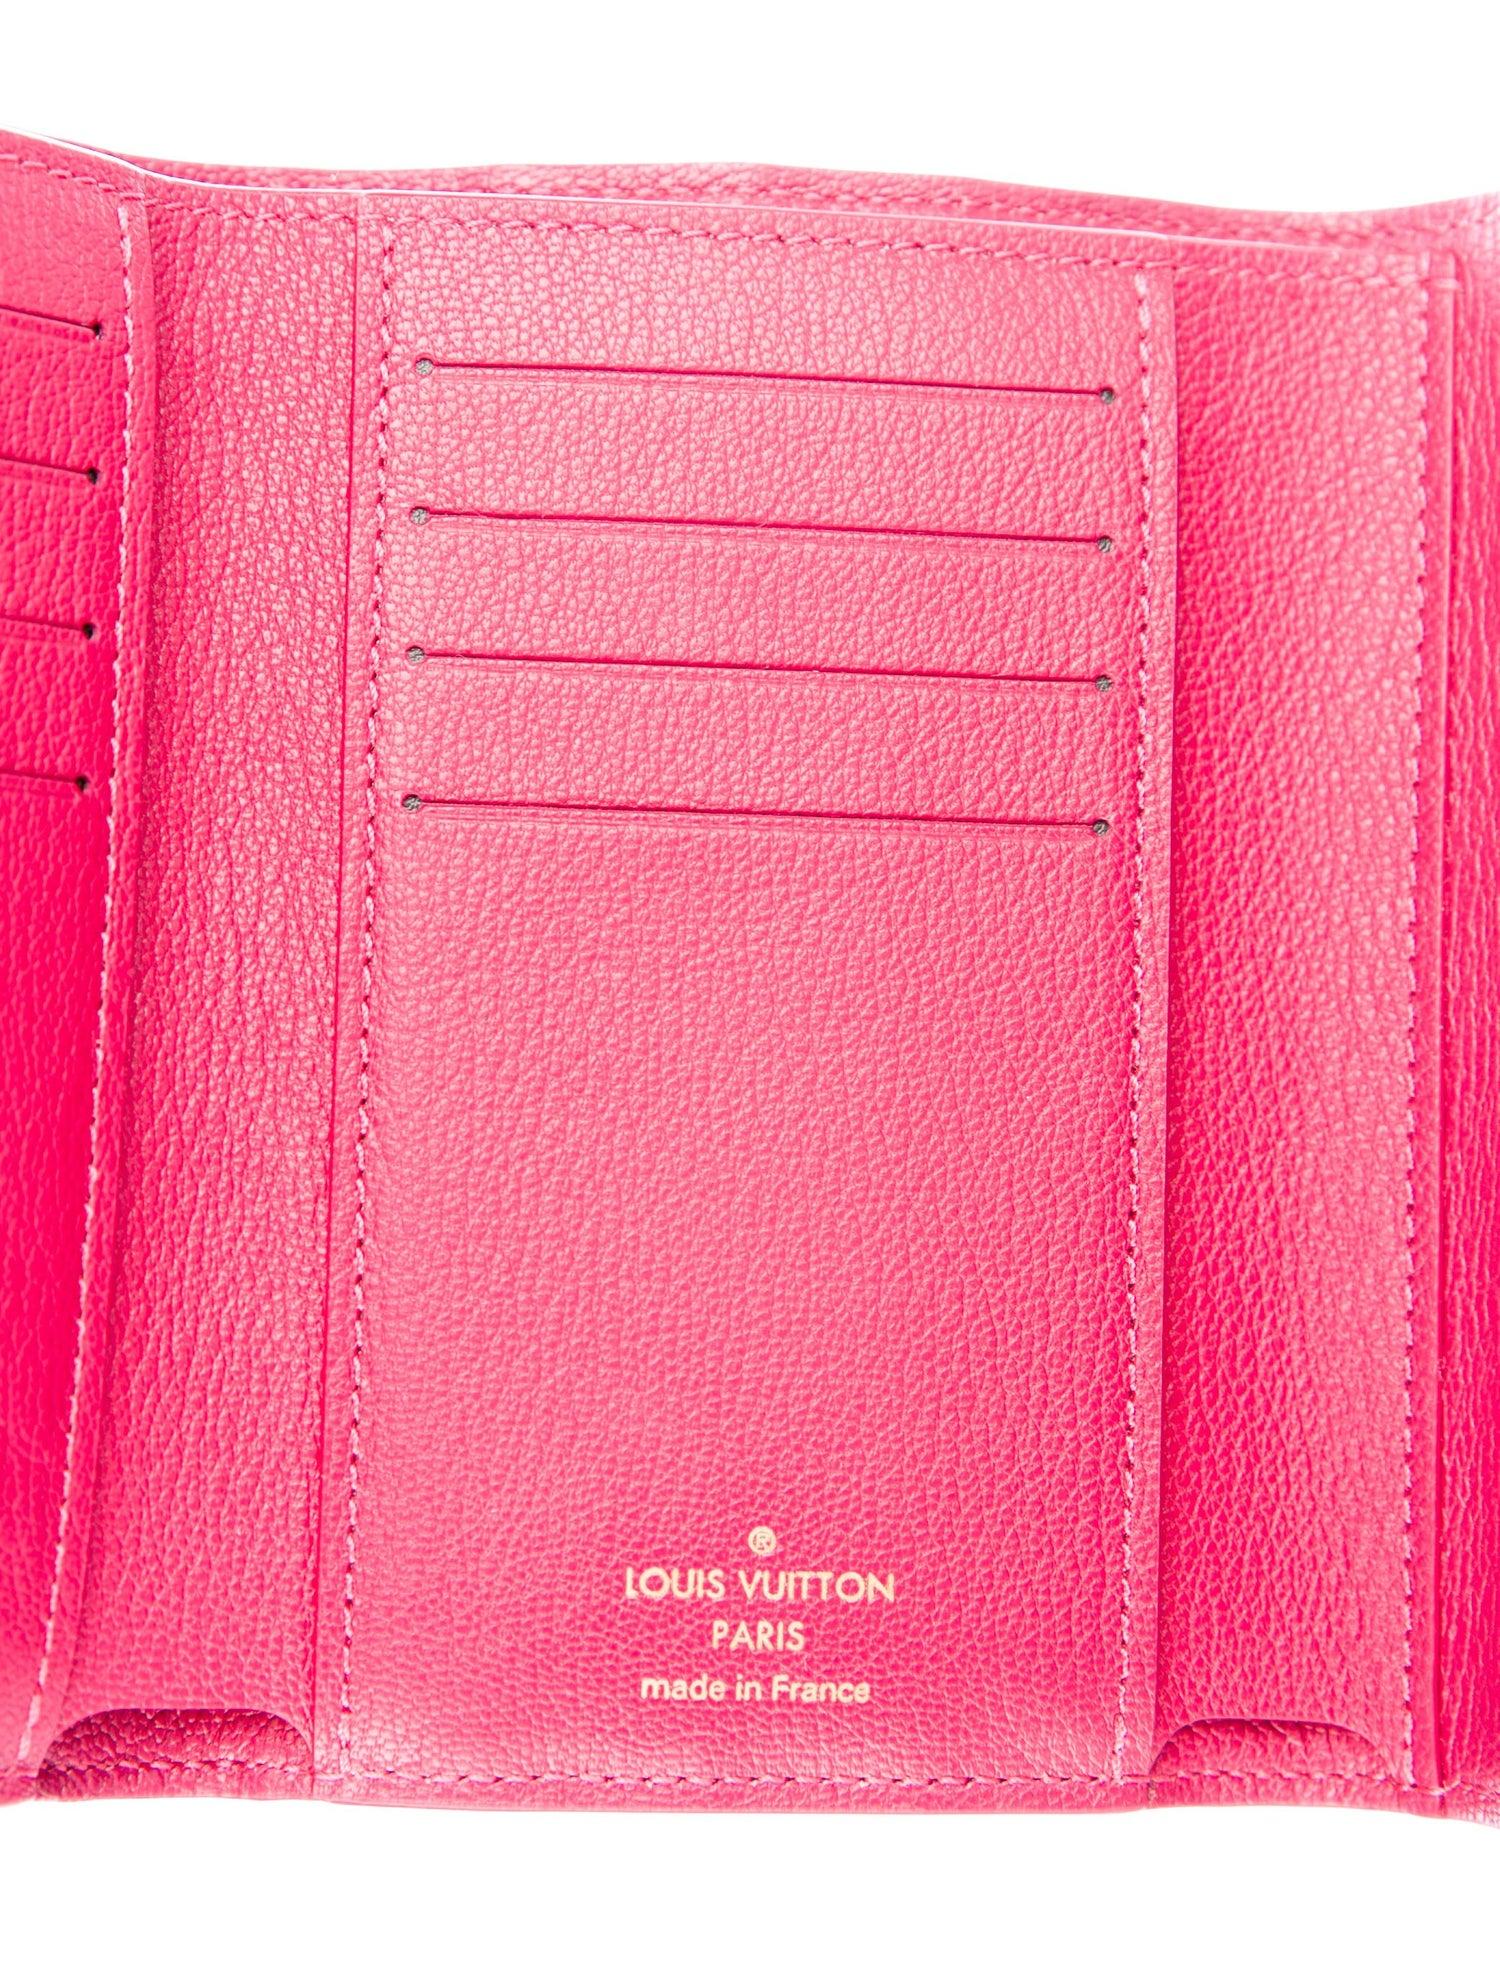 Louis Vuitton NEW Pink Alligator Exotic Gold Charm Small Clutch Wallet in Box 1